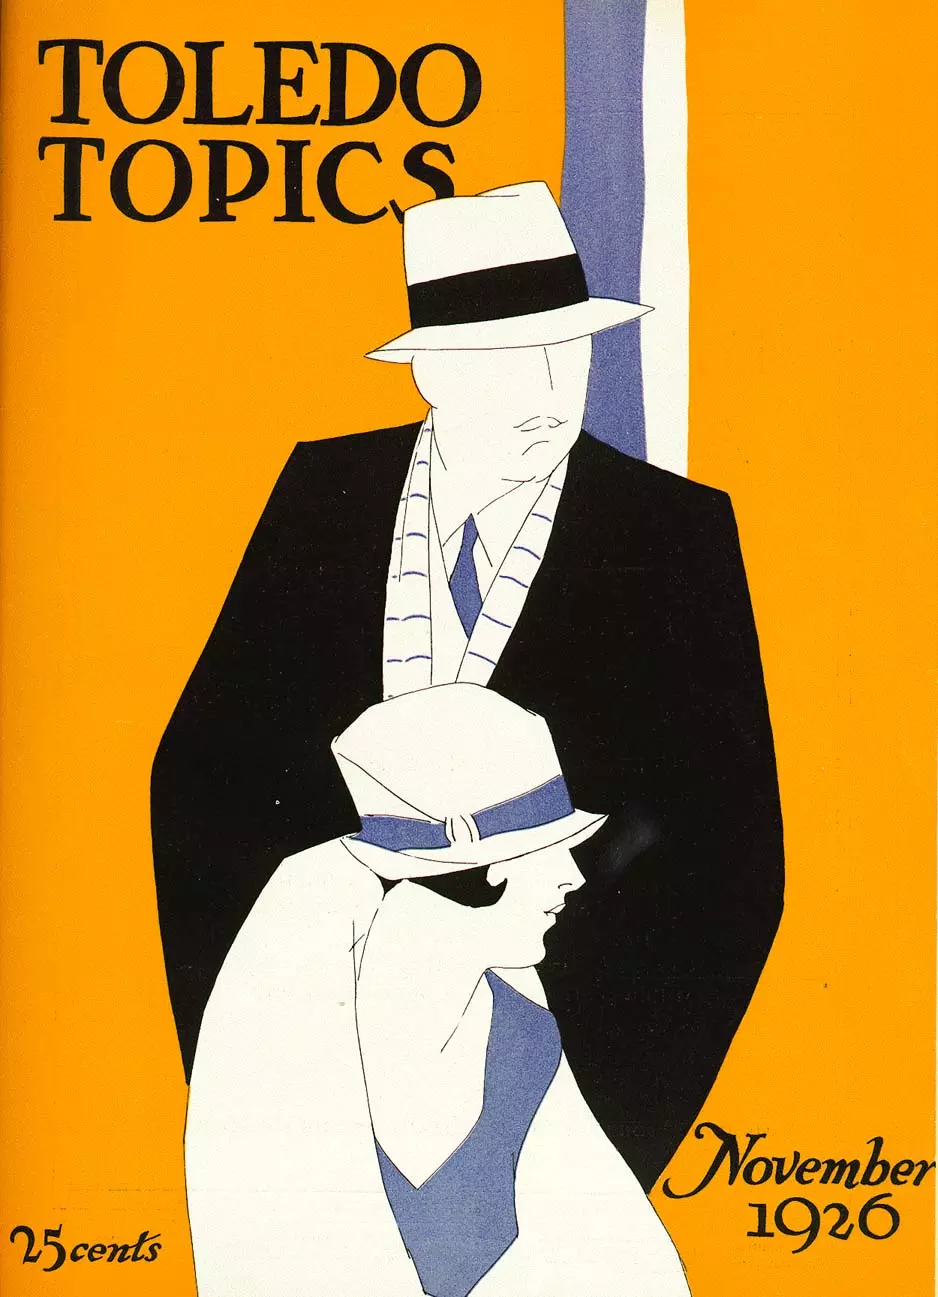 Cover of the November 1926 issue